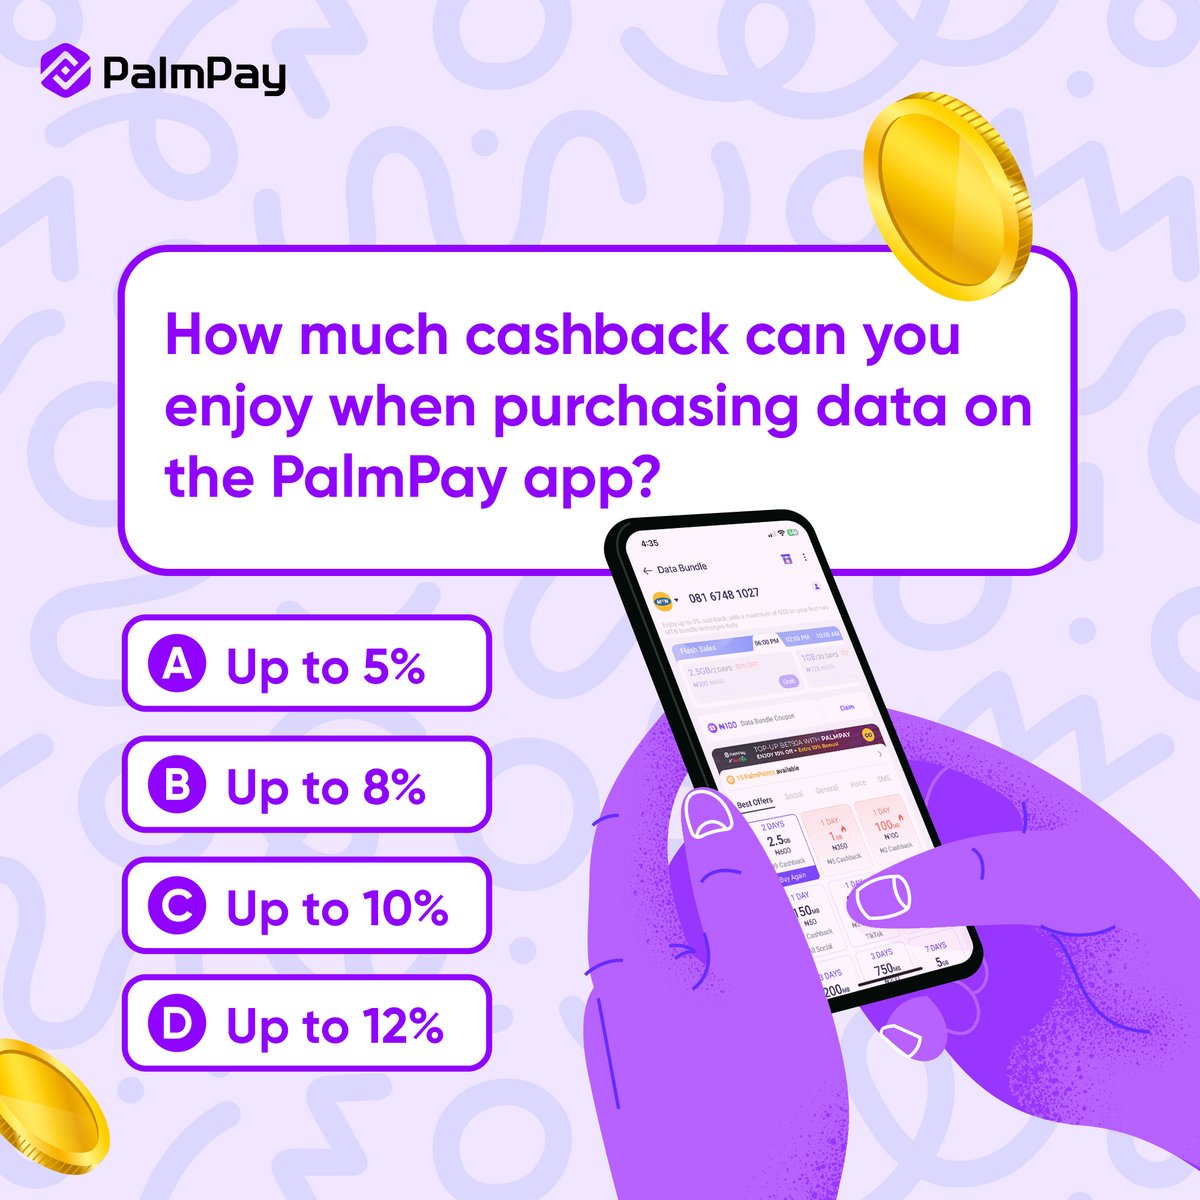 Let us know your answer in the comments and stand a chance to win a cash reward of ₦2,500 and a ₦500 coupon. #PalmPay